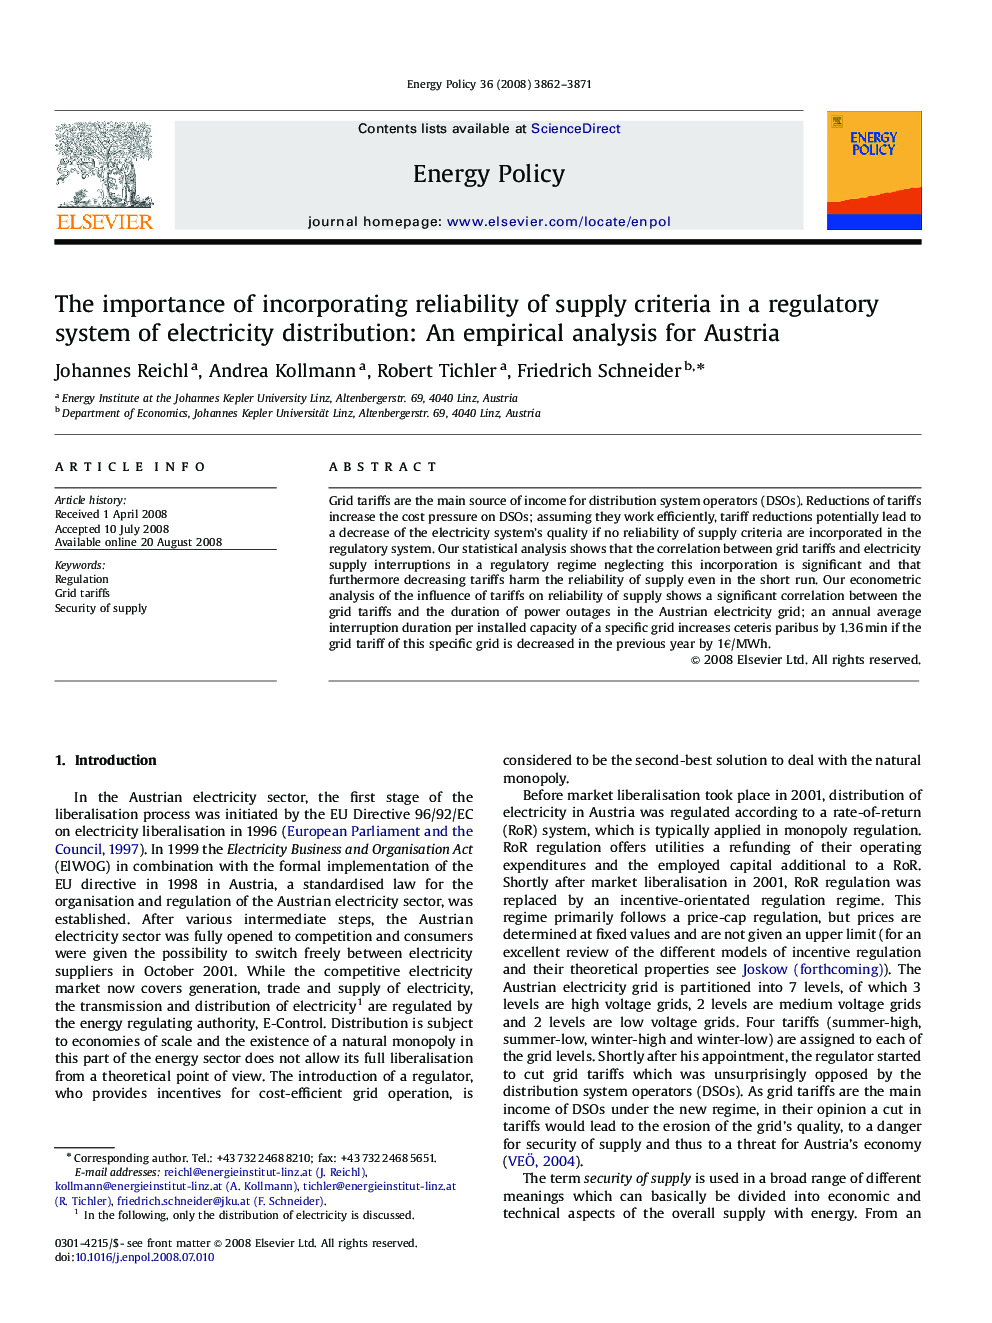 The importance of incorporating reliability of supply criteria in a regulatory system of electricity distribution: An empirical analysis for Austria